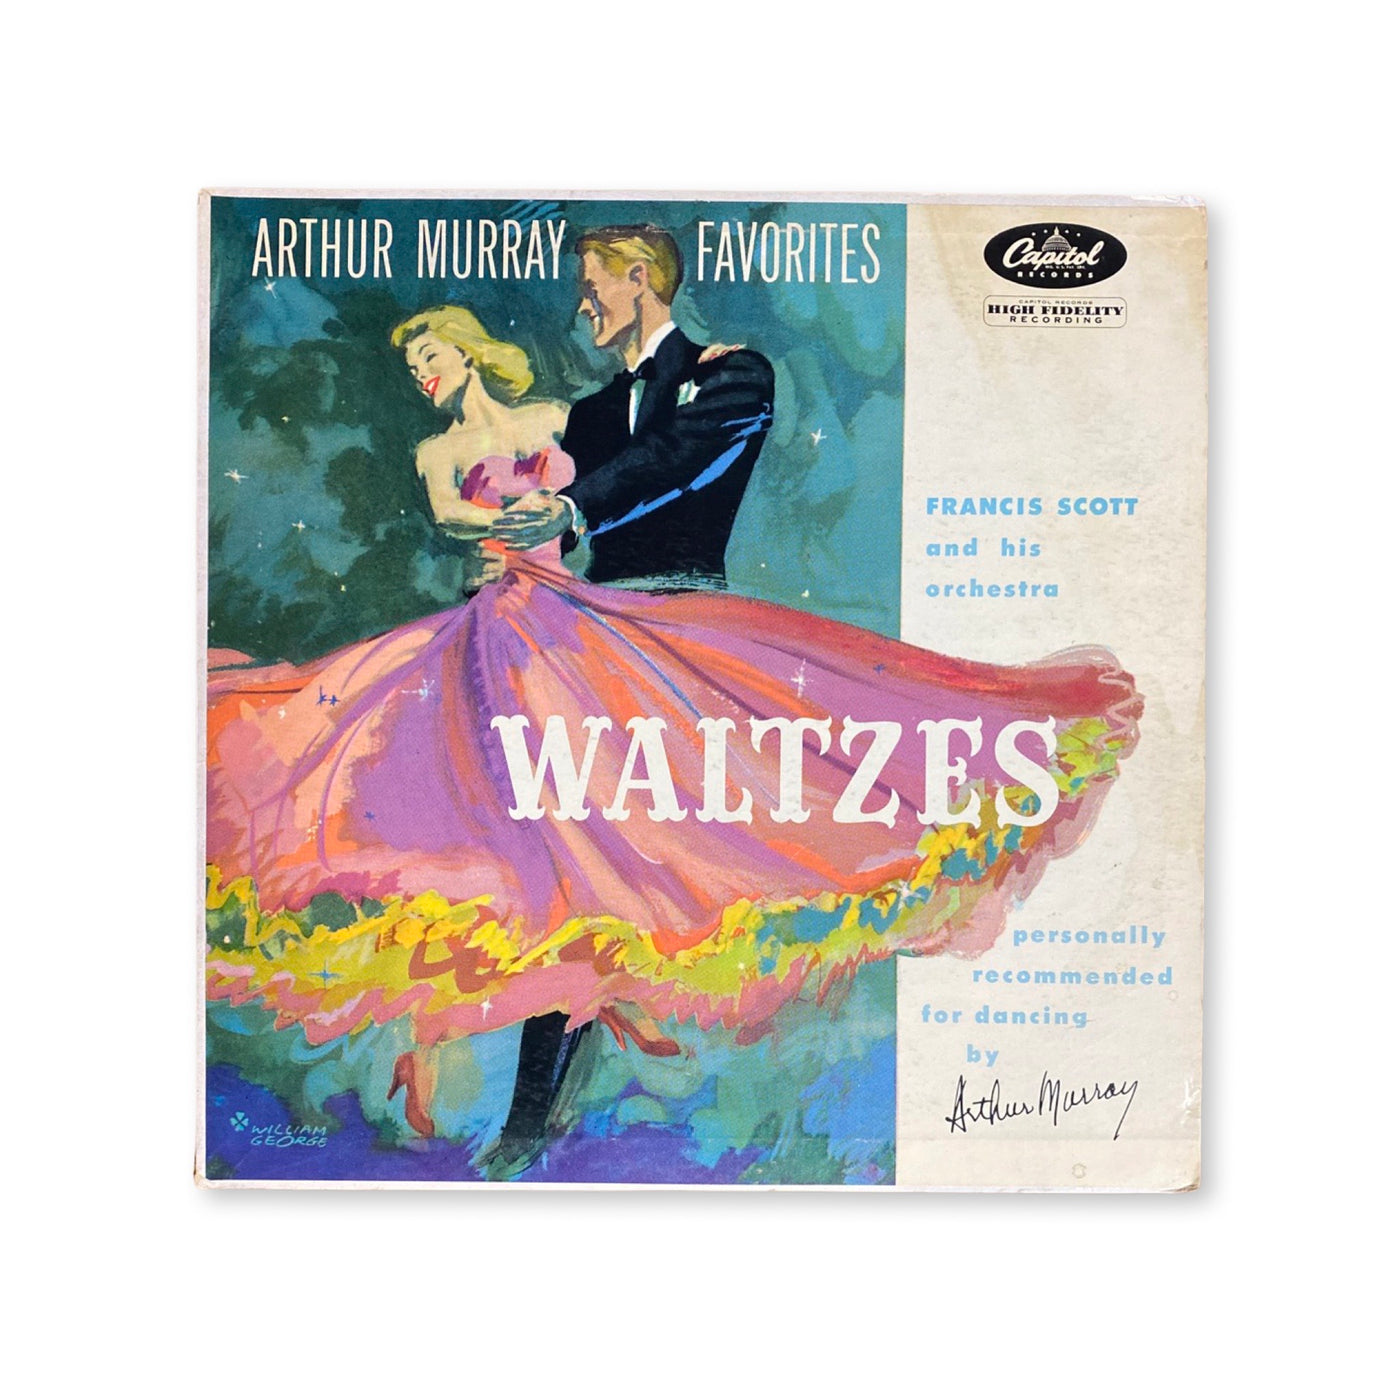 Francis Scott And His Orchestra - Arthur Murray Favorites - Waltzes